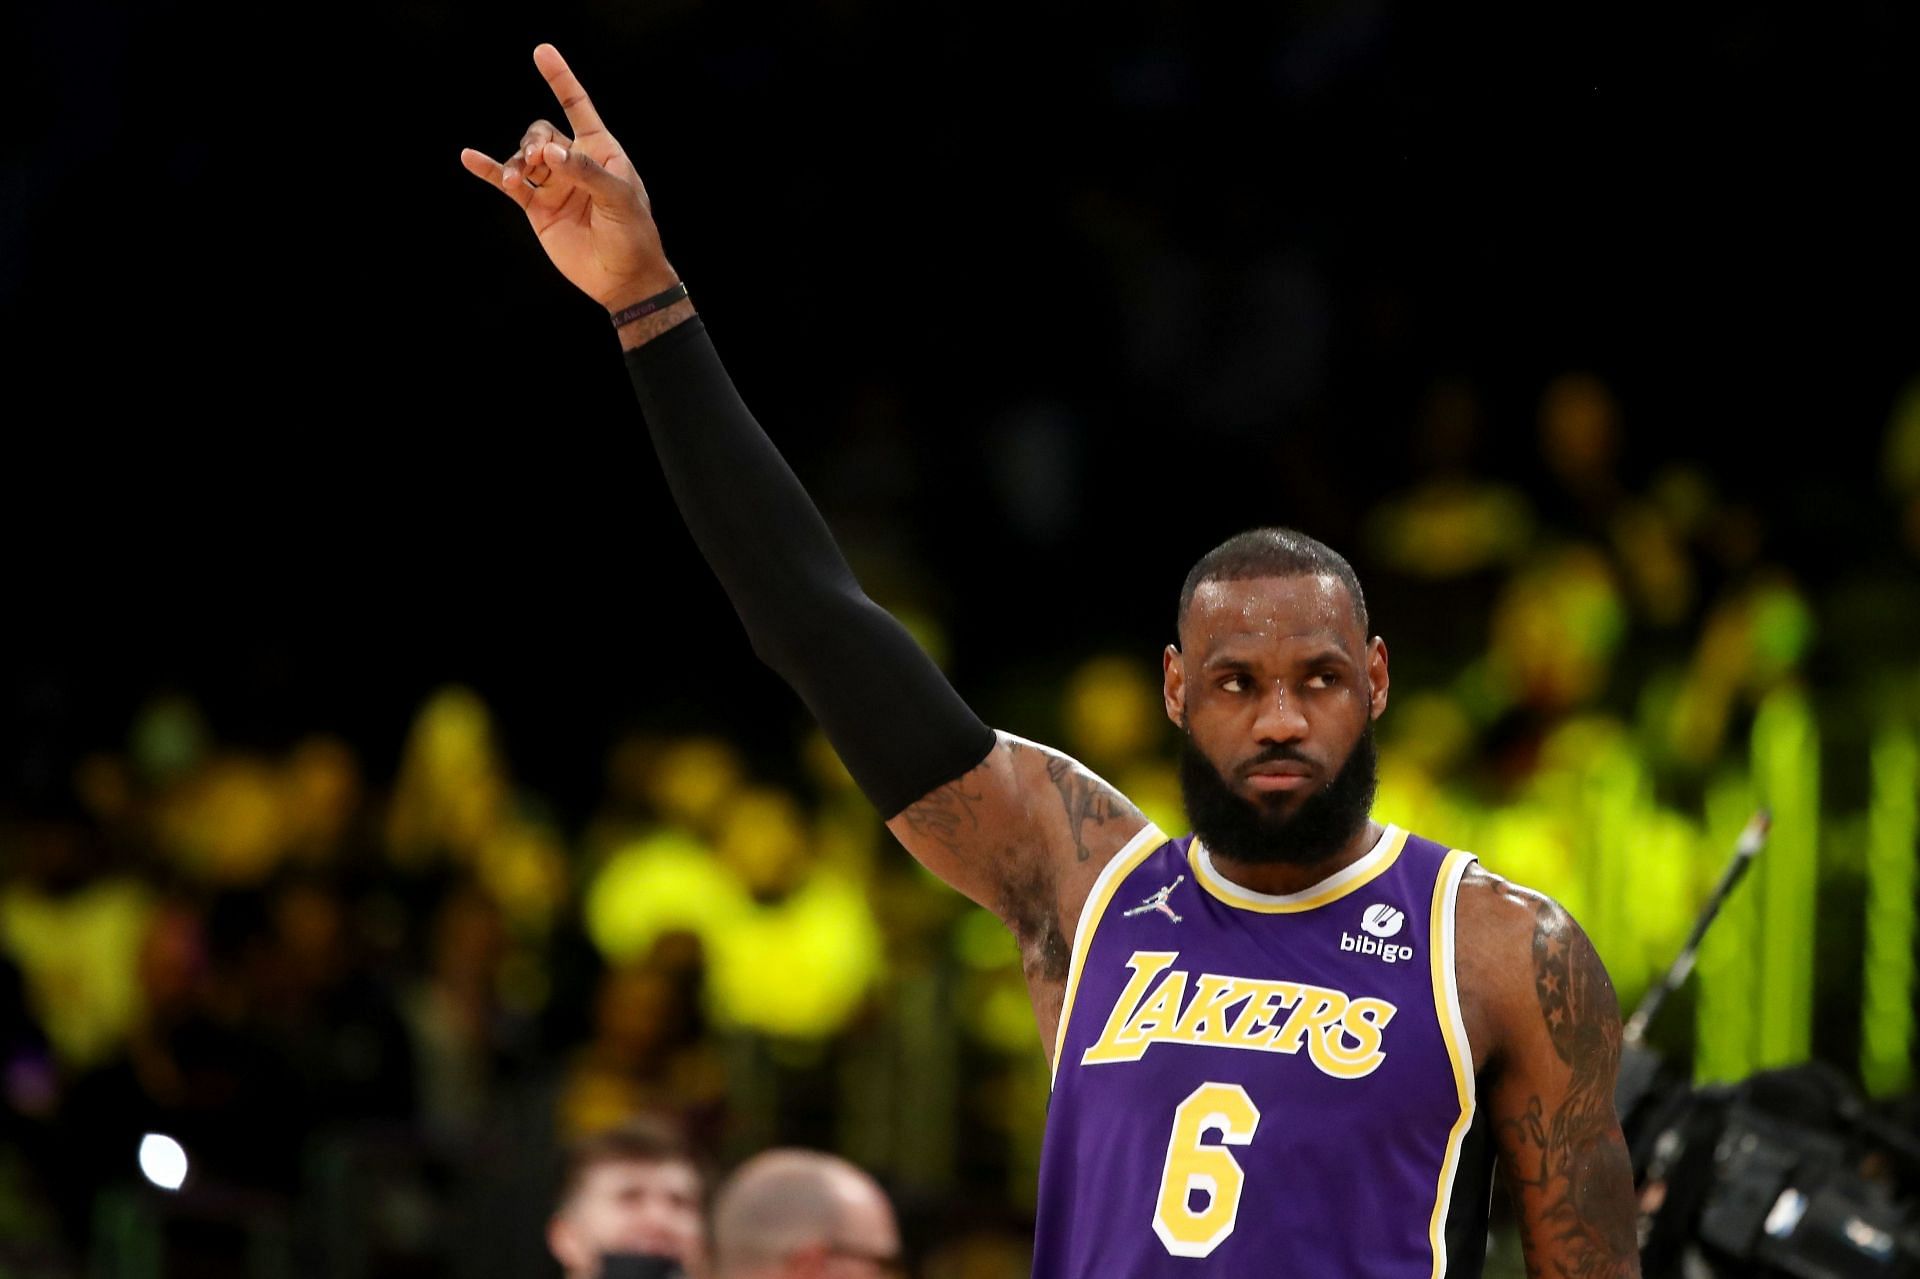 LeBron James #6 of the LA Lakers acknowledges the crowd during the game against the Utah Jazz at Crypto.com Arena on February 16, 2022 in Los Angeles, California.